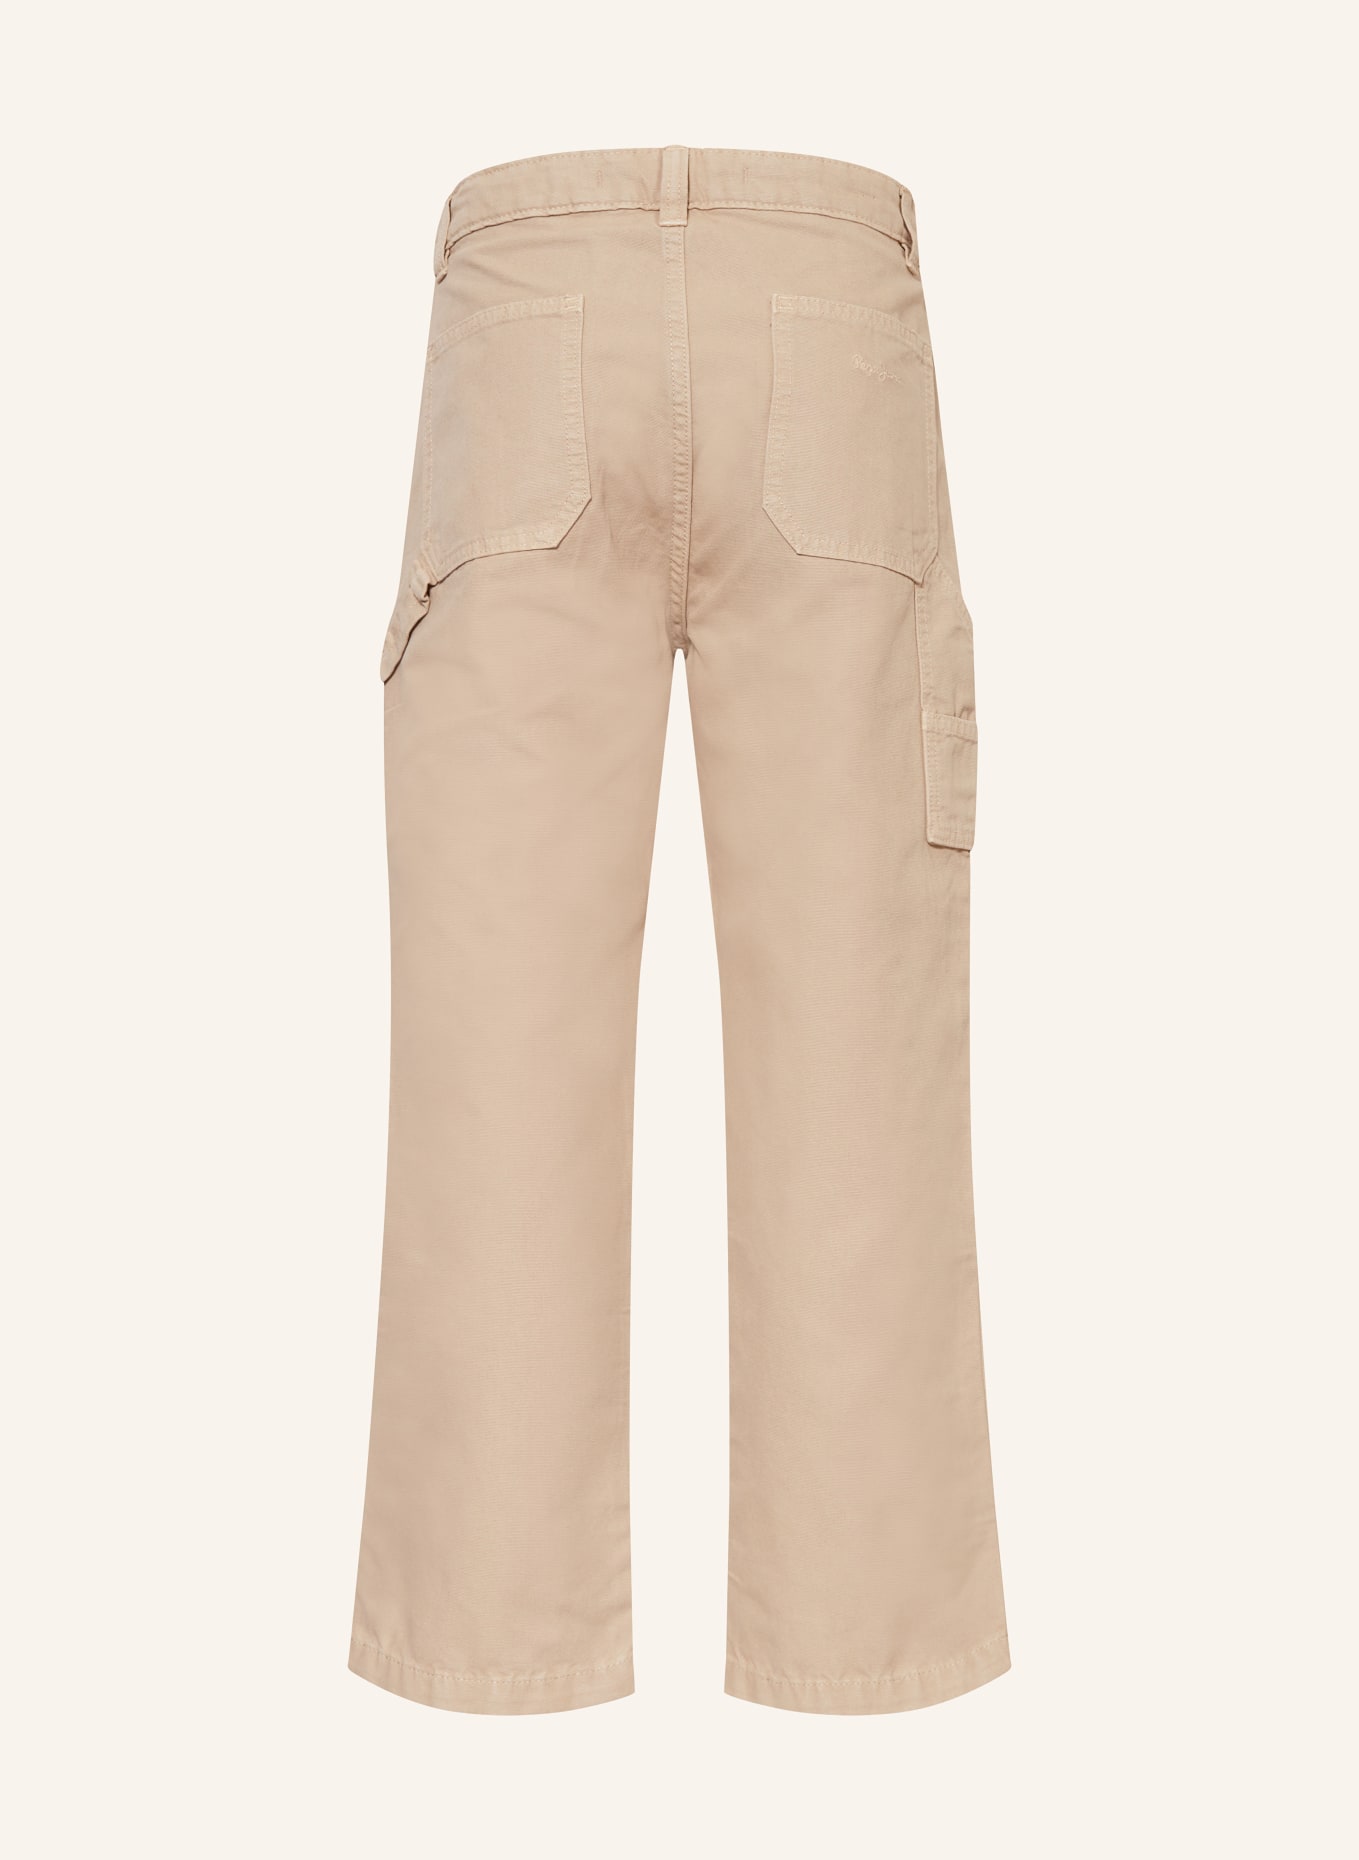 Pepe Jeans Hose WORKER Relaxed Fit, Farbe: BEIGE (Bild 2)